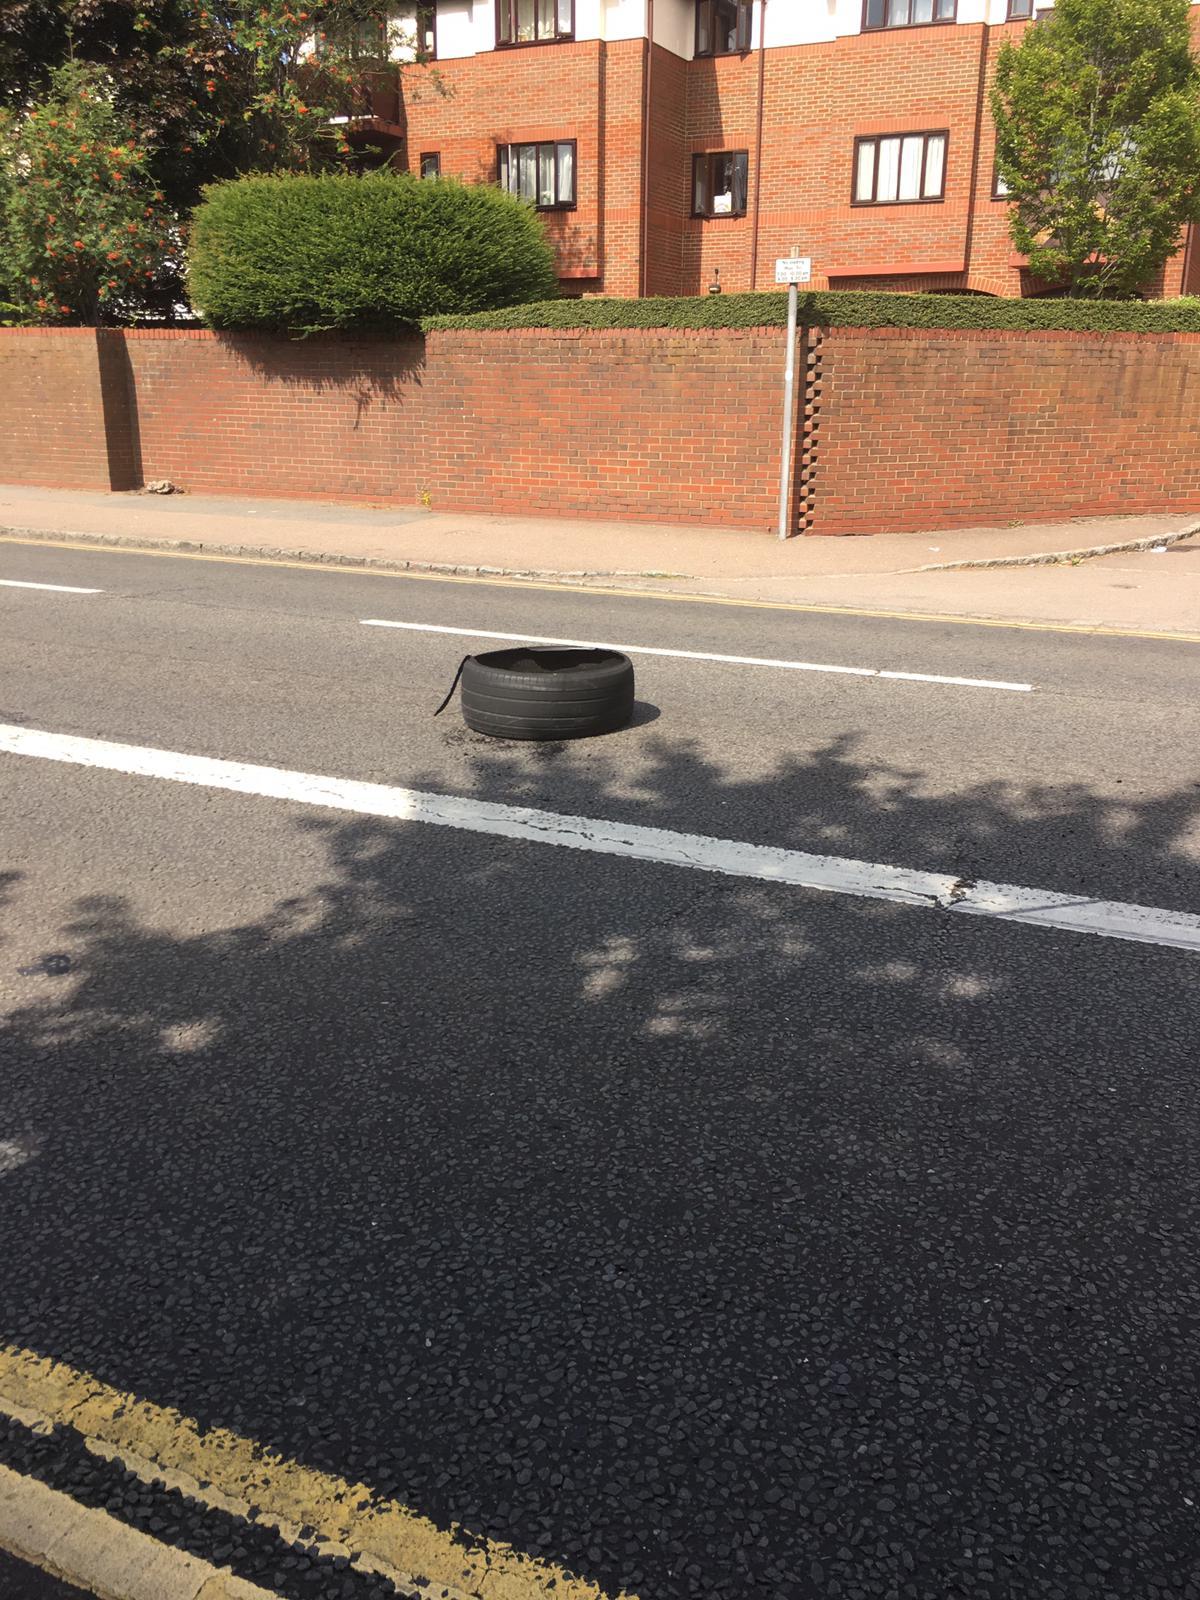 It is not known how long the tyre was left in the middle of the road